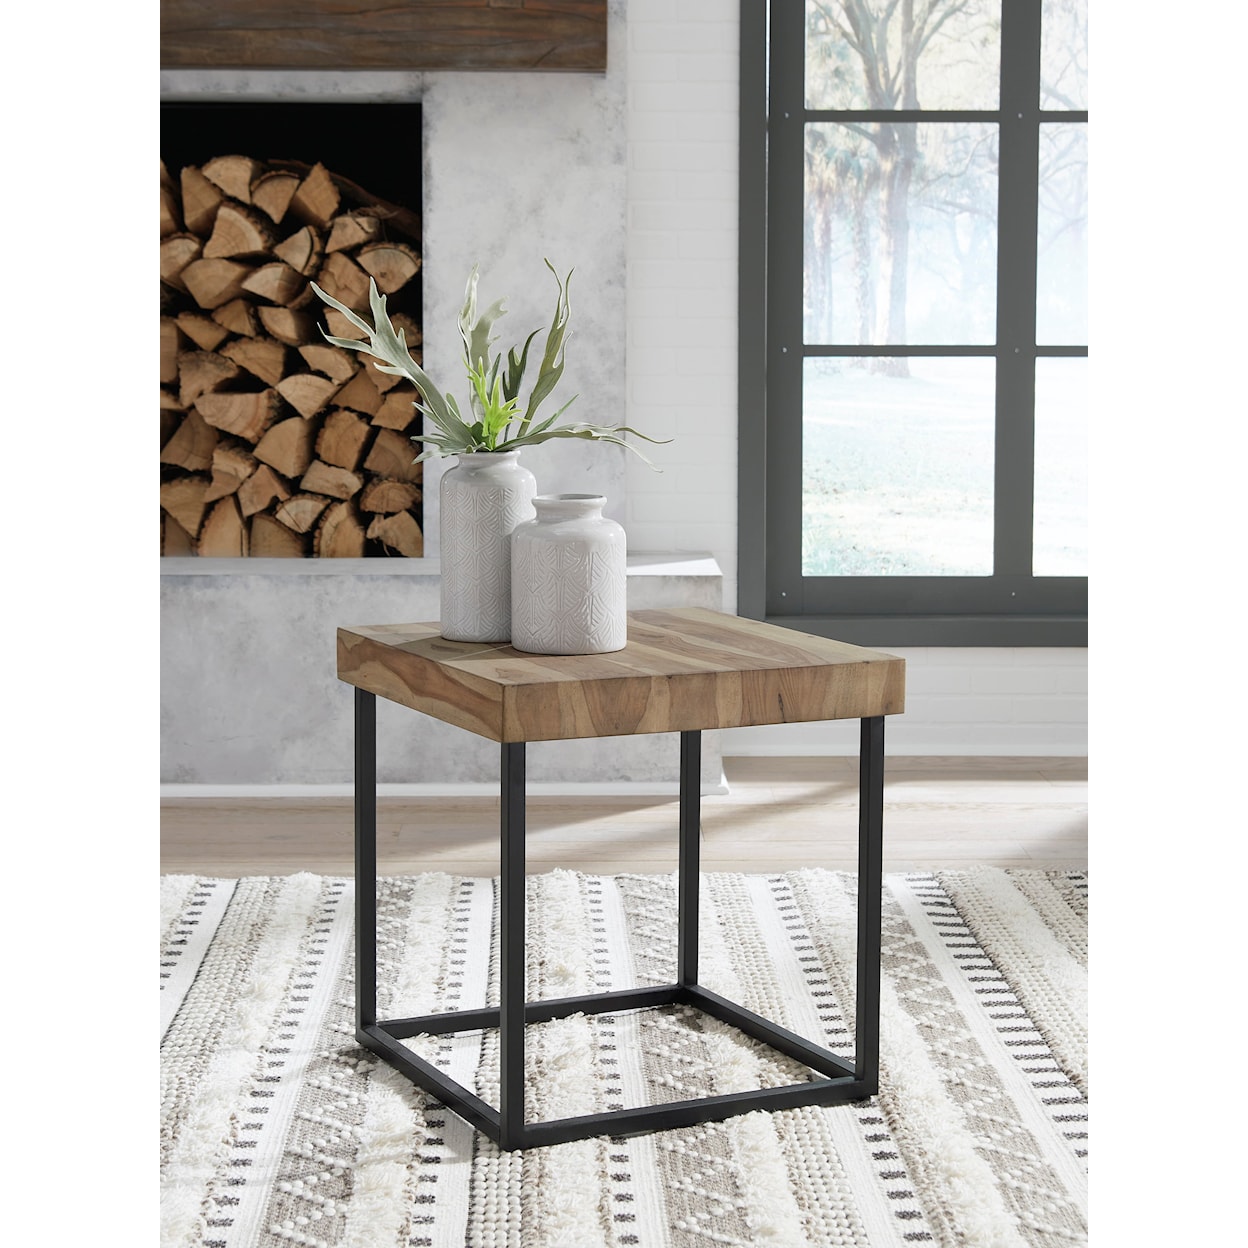 Benchcraft Bellwick Casual End Table